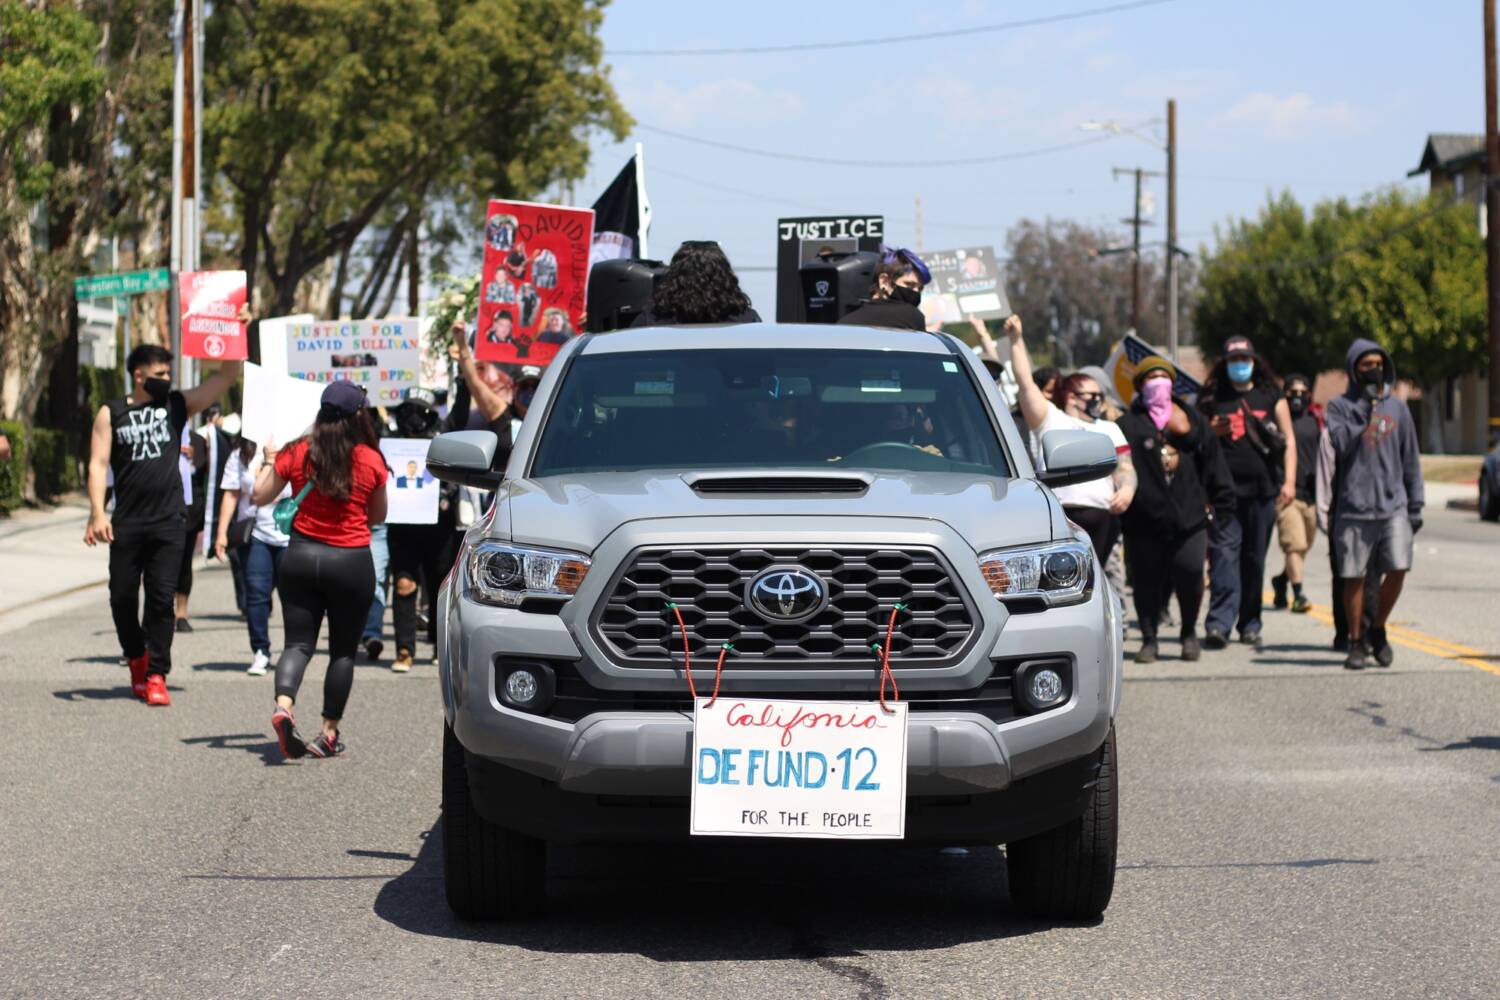 About 50 people protested in the march, walking and driving through neighborhoods and city streets bringing attention to the issue as Buena Park residents watched from their properties. Photo credit: Myron Caringal